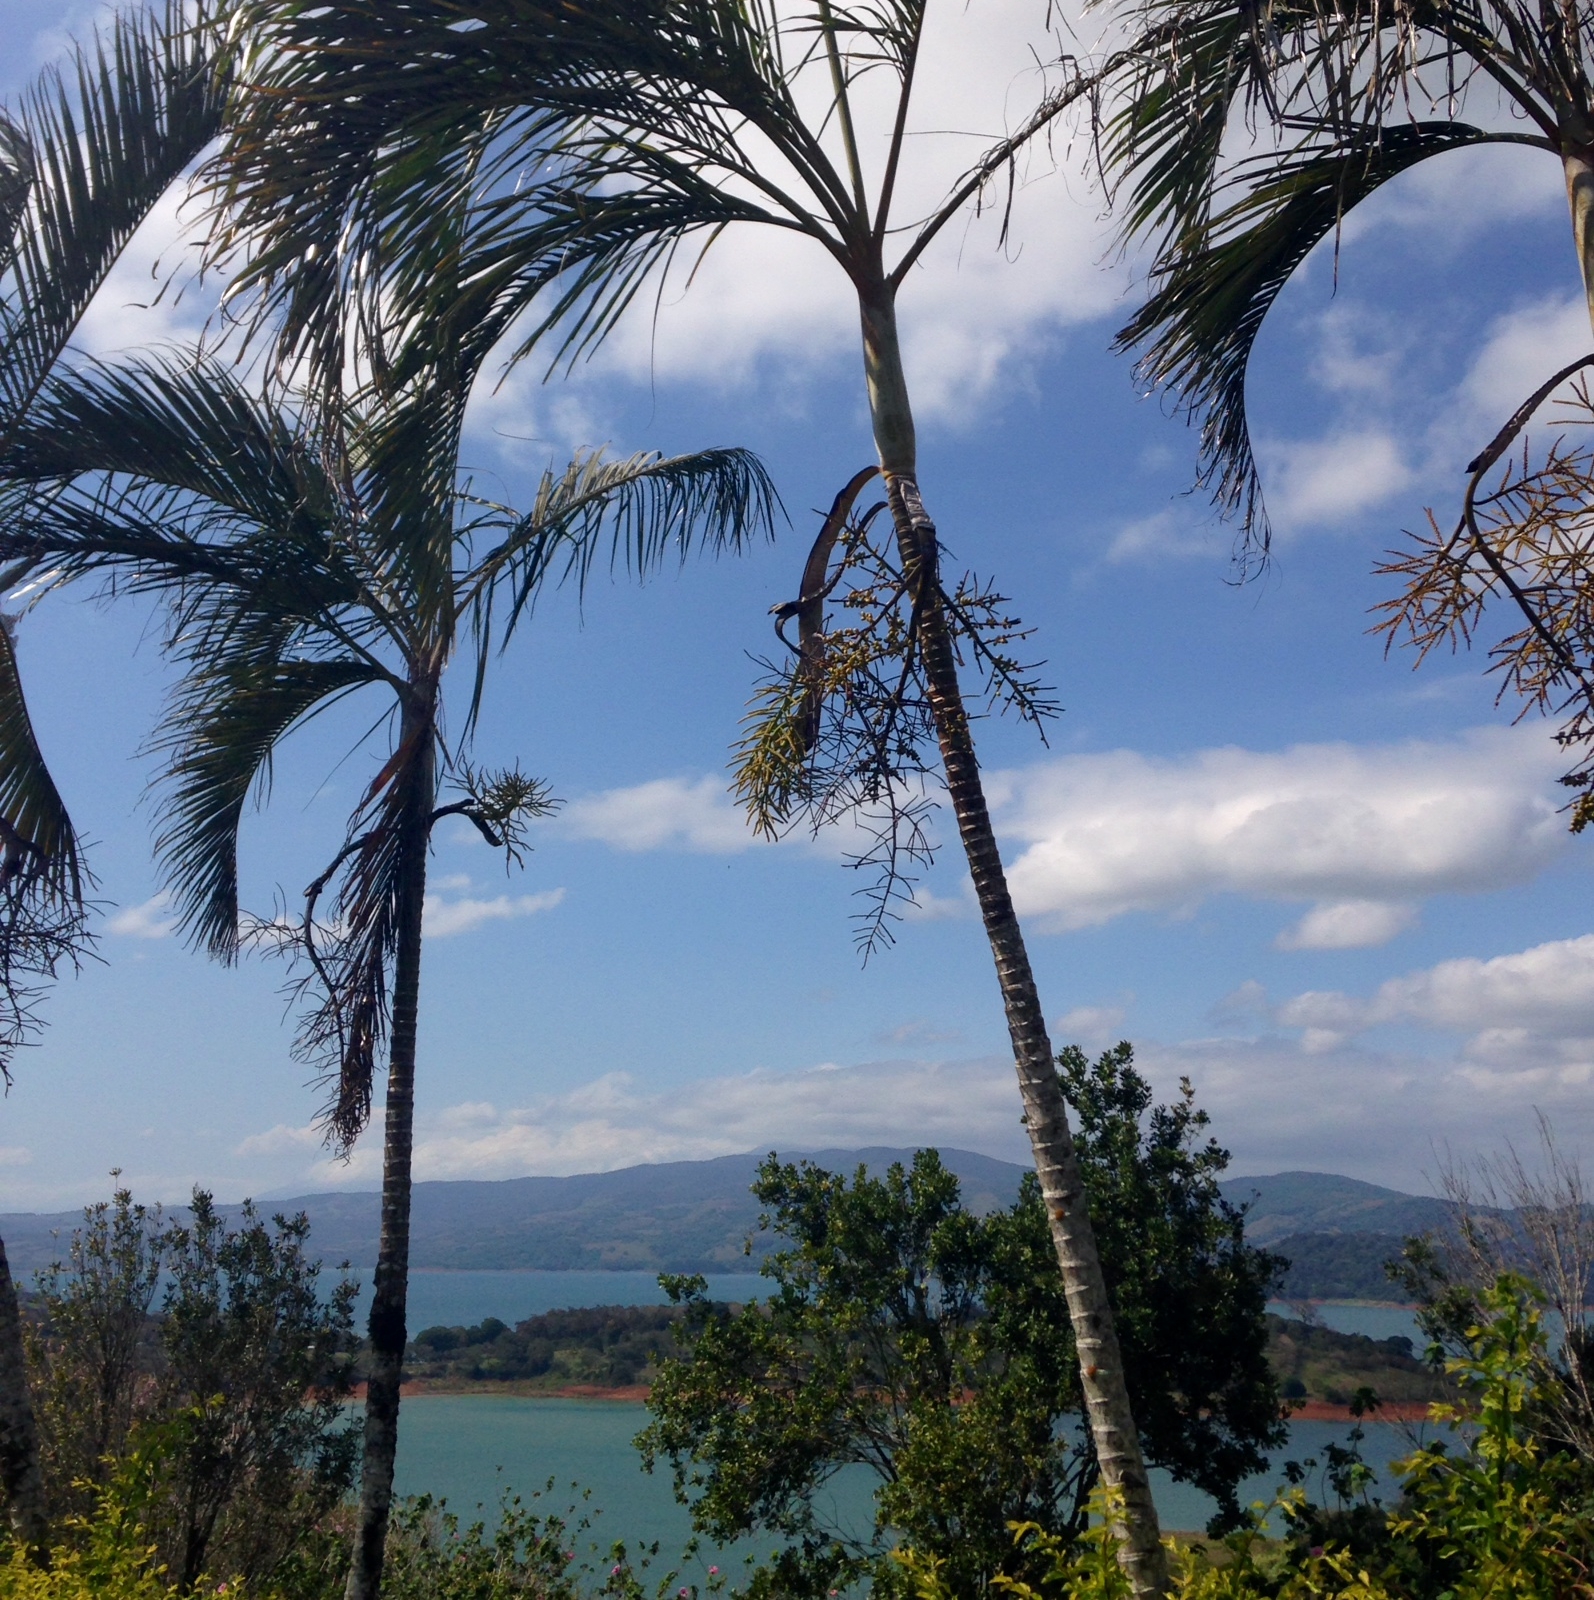 The view over Lake Arenal